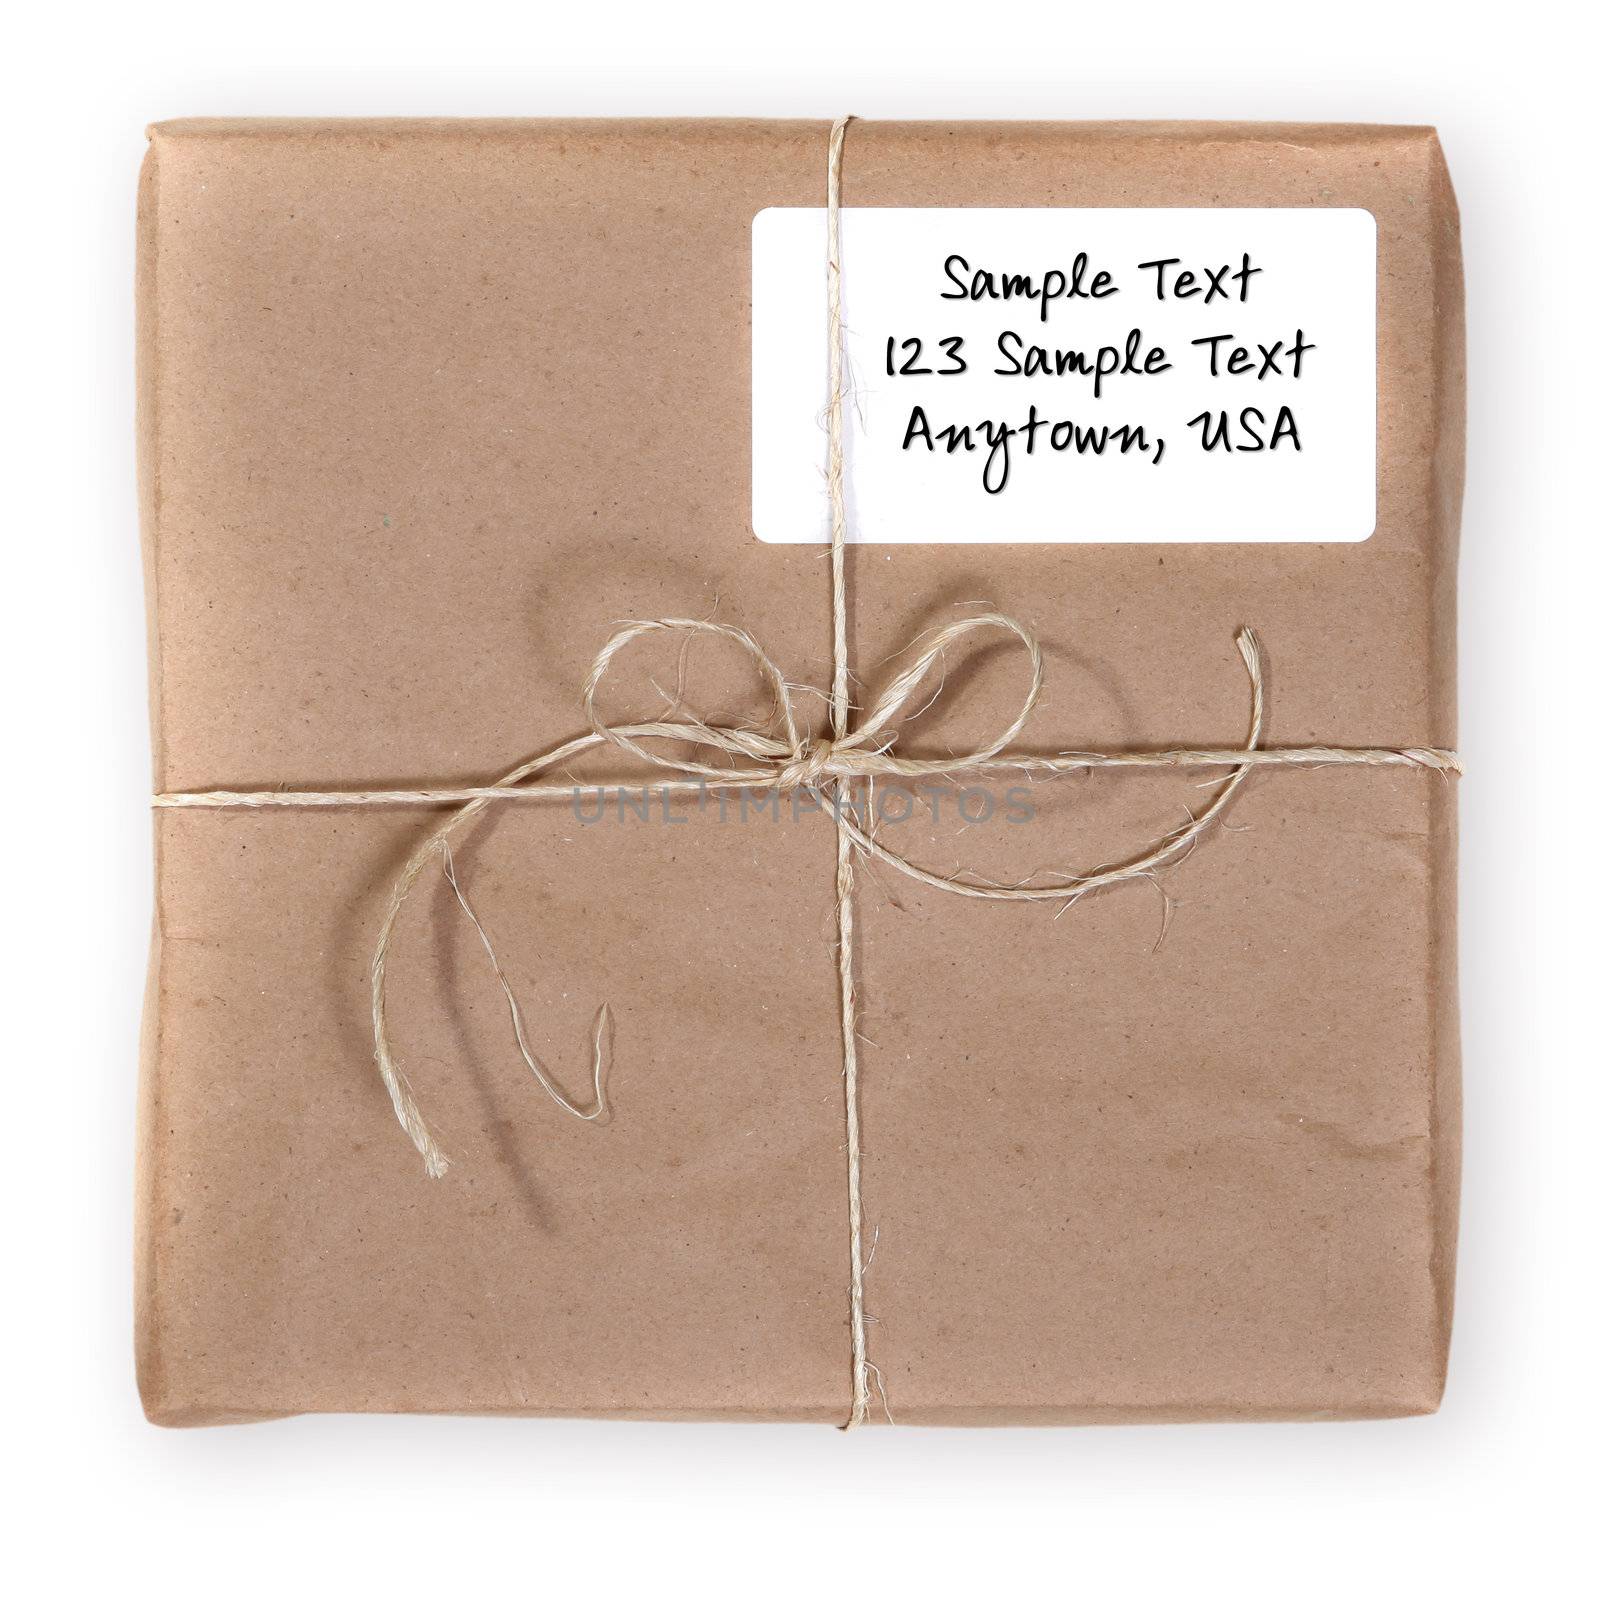 Typical Shipping Package Sent Through the Mail. Sample Text Easily Removed on White Background